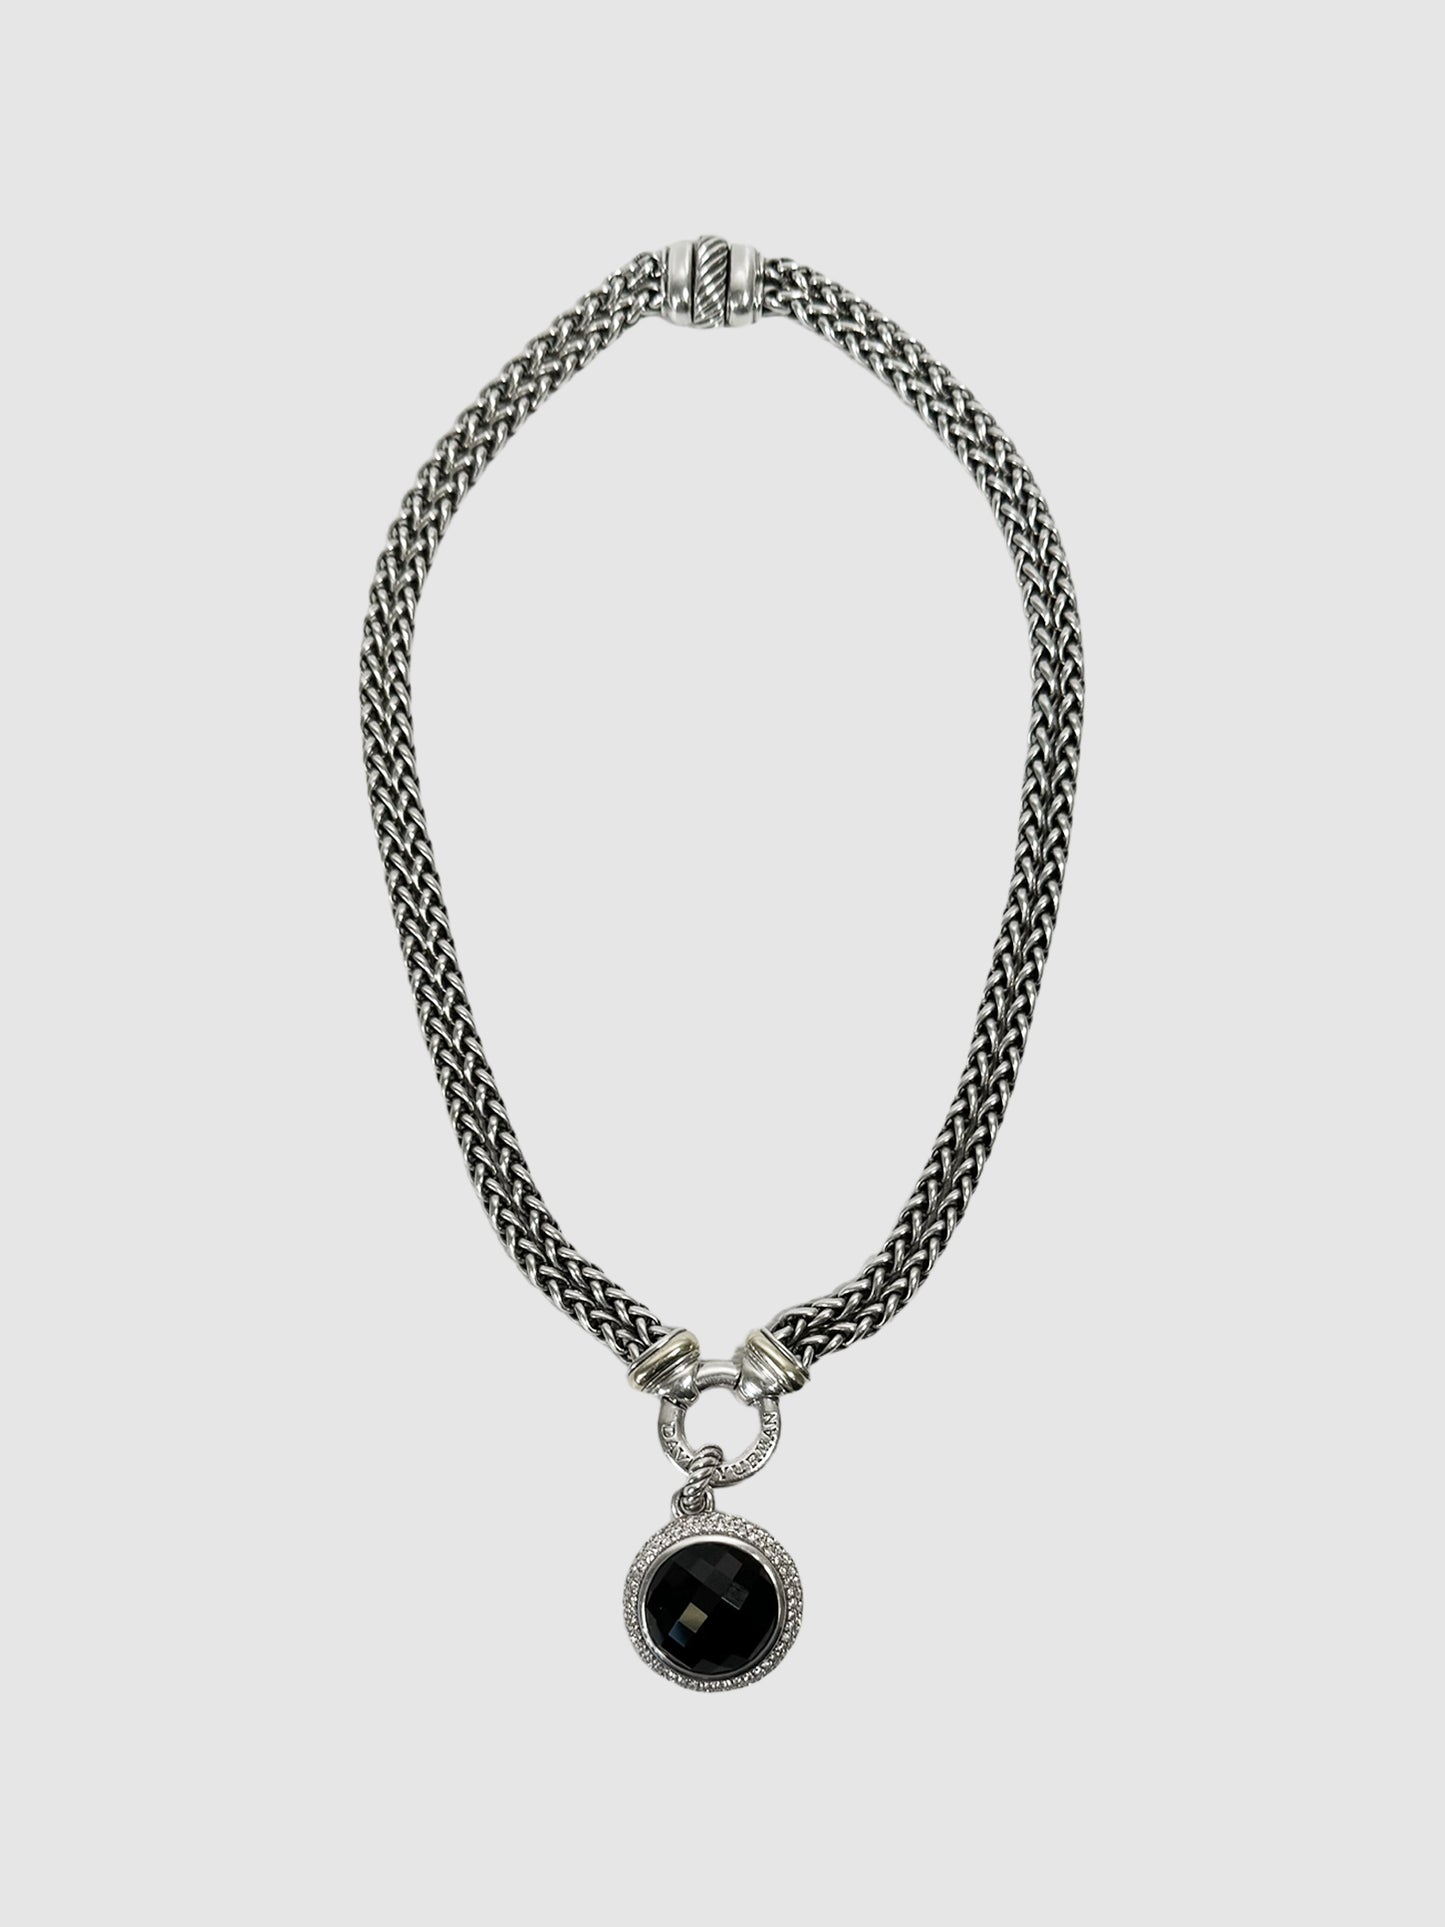 David Yurman Cerise Black Onyx and Diamonds 18mm Pendant, and Sterling Silver Double Chain Necklace